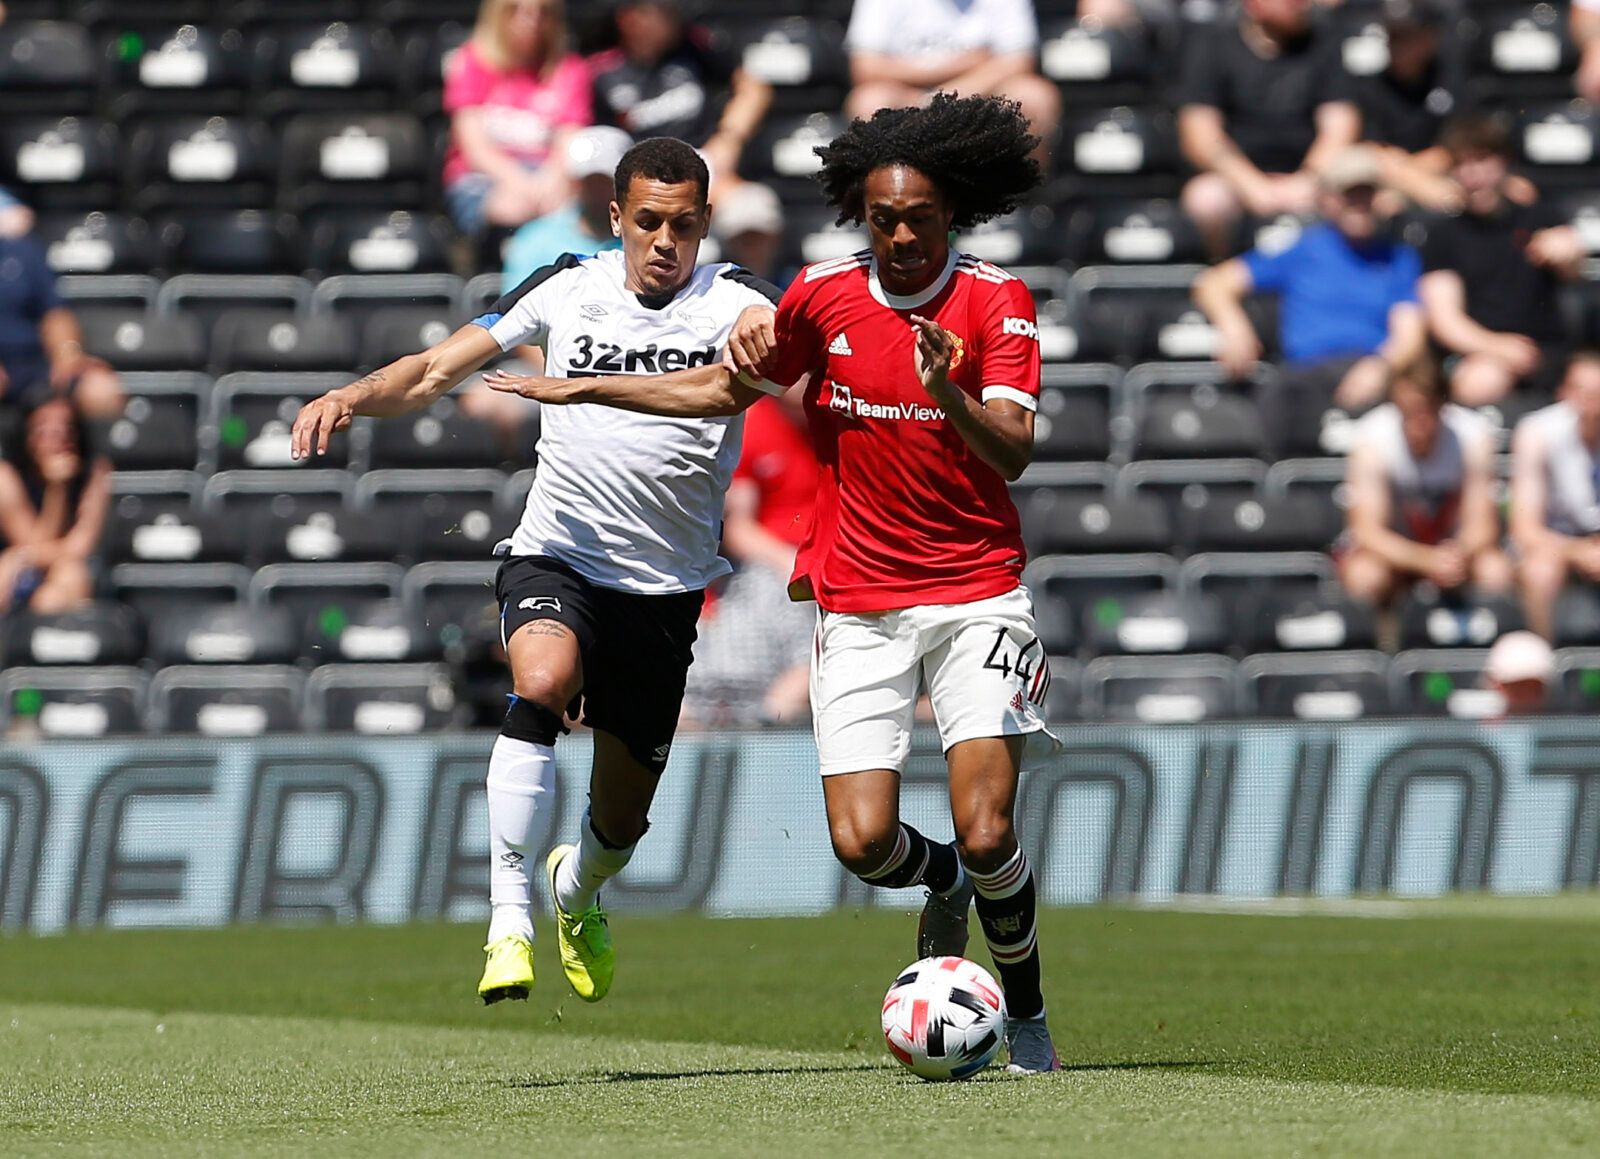 Soccer Football - Pre Season Friendly - Derby County v Manchester United - Pride Park, Derby, Britain - July 18, 2021 Manchester United's Tahith Chong in action with Derby County's Ravel Morrison Action Images via Reuters/Craig Brough